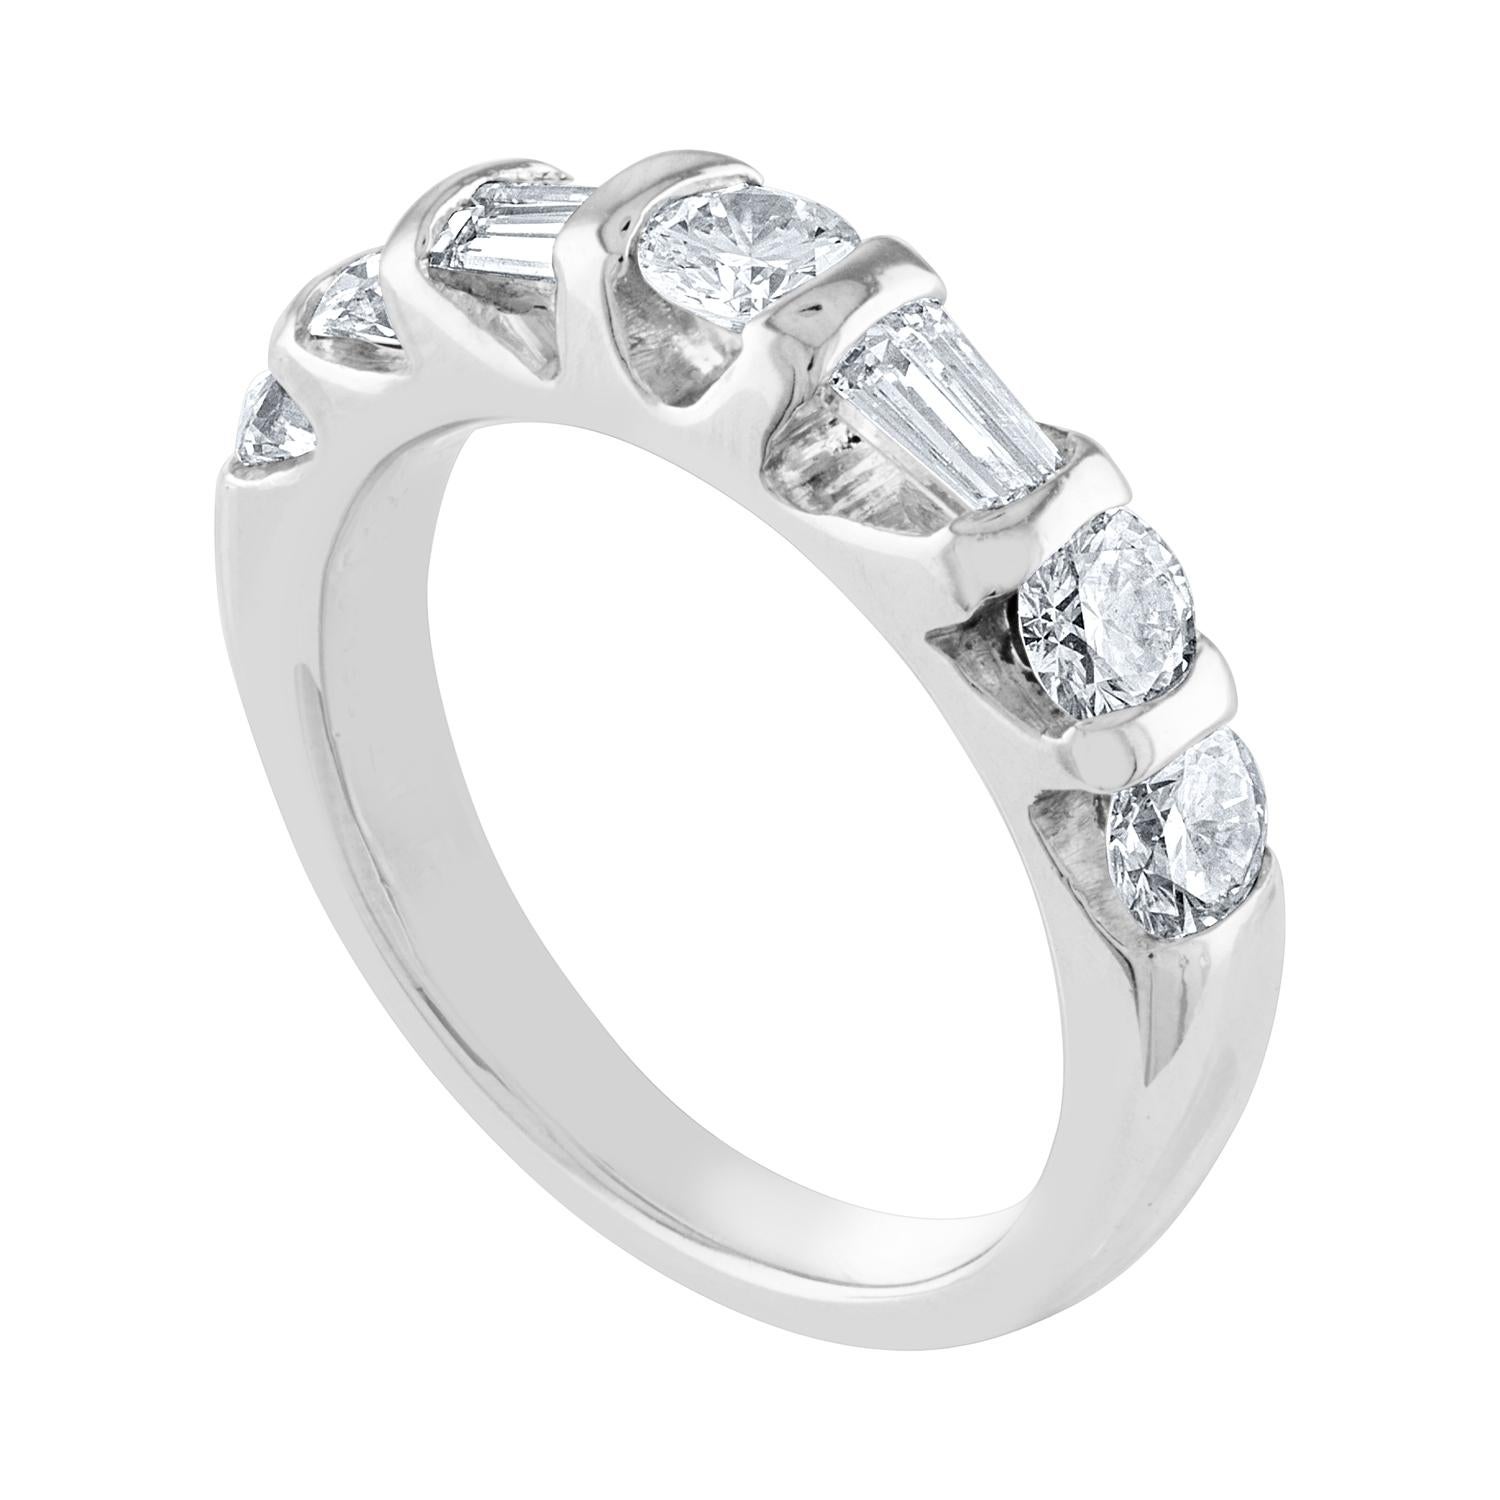 The ring is Platinum
There are 1.25 Carats In Diamonds F/G VS
The ring weighs 8.5 grams
The ring is a size 5.50, sizable.